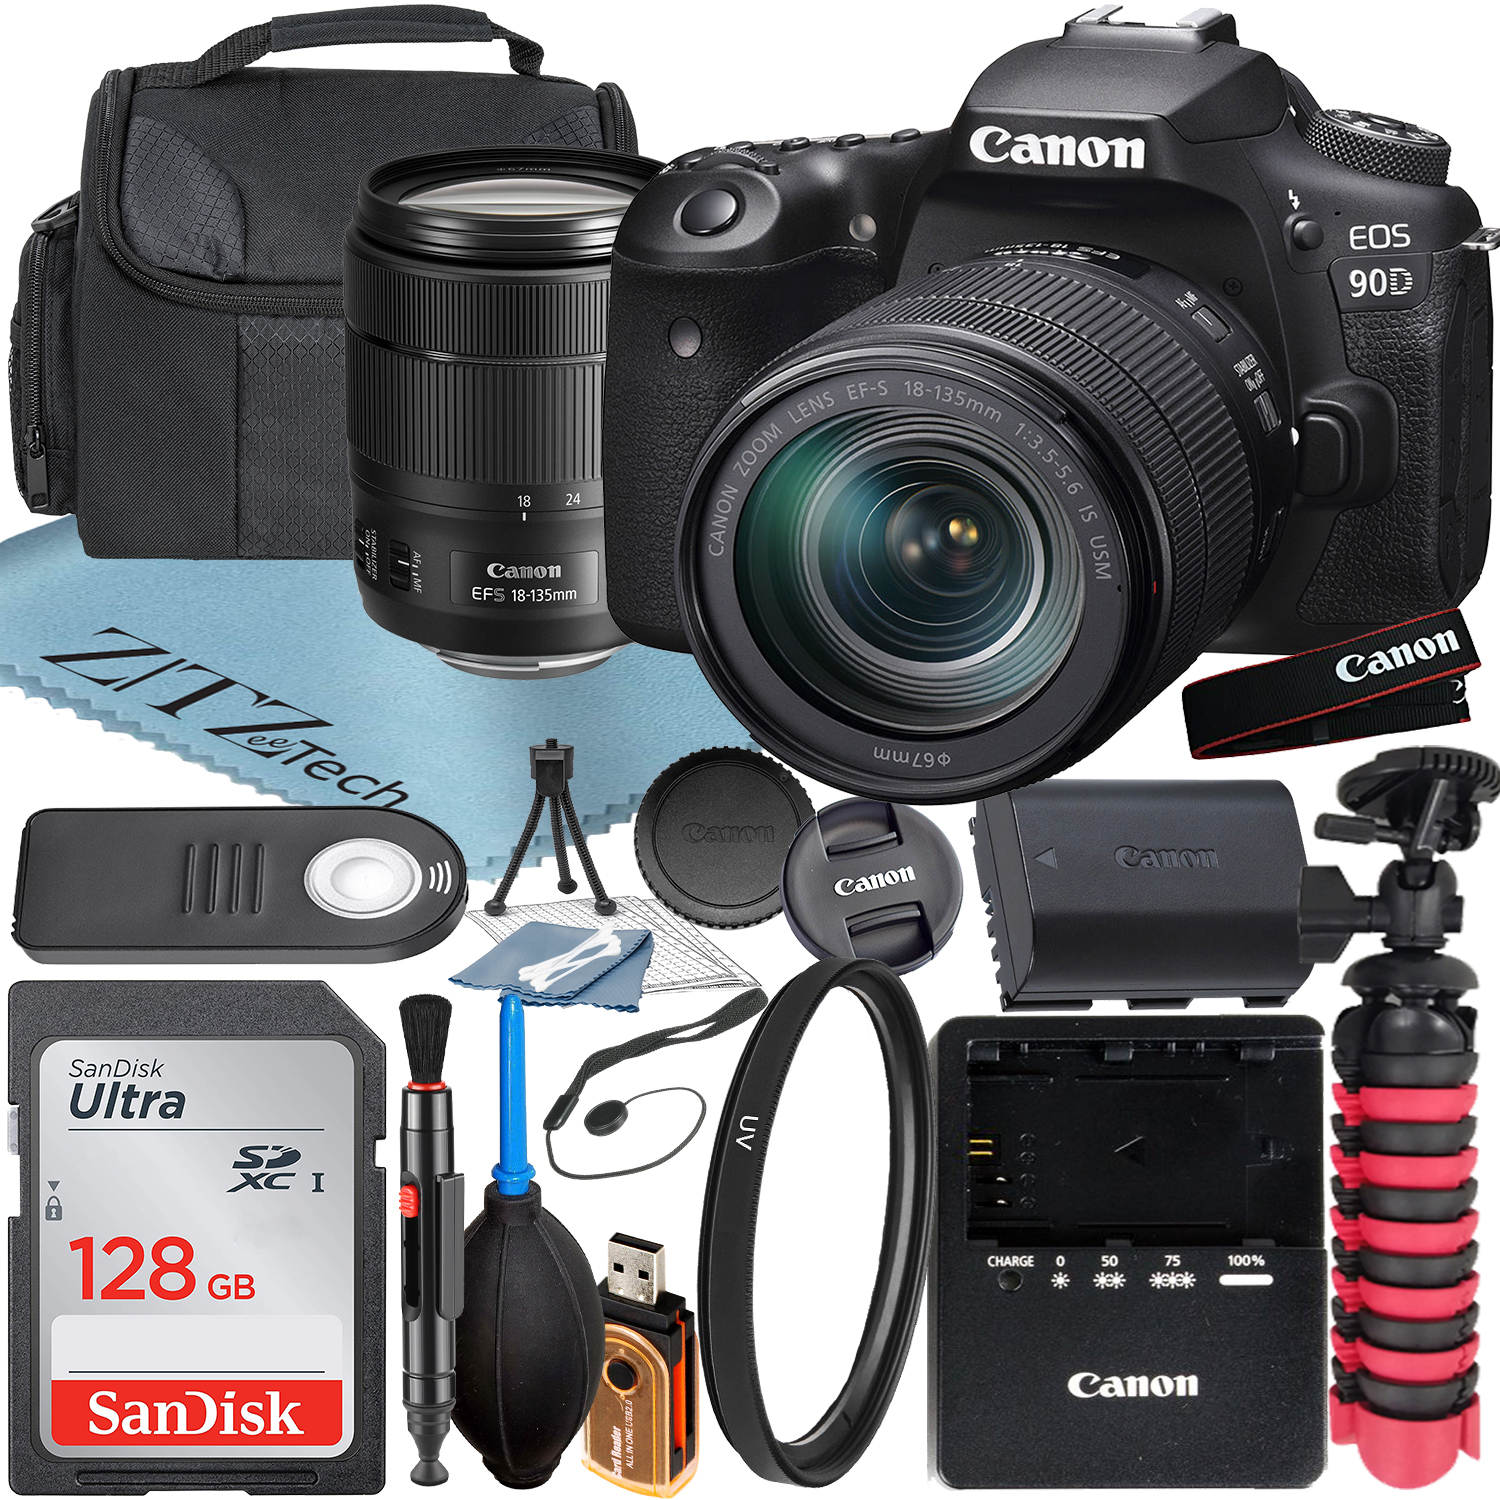 Canon EOS 90D DSLR Camera with 18-135mm IS USM Lens + SanDisk 128GB Memory Card + Case + UV Filter + ZeeTech Accessory Bundle